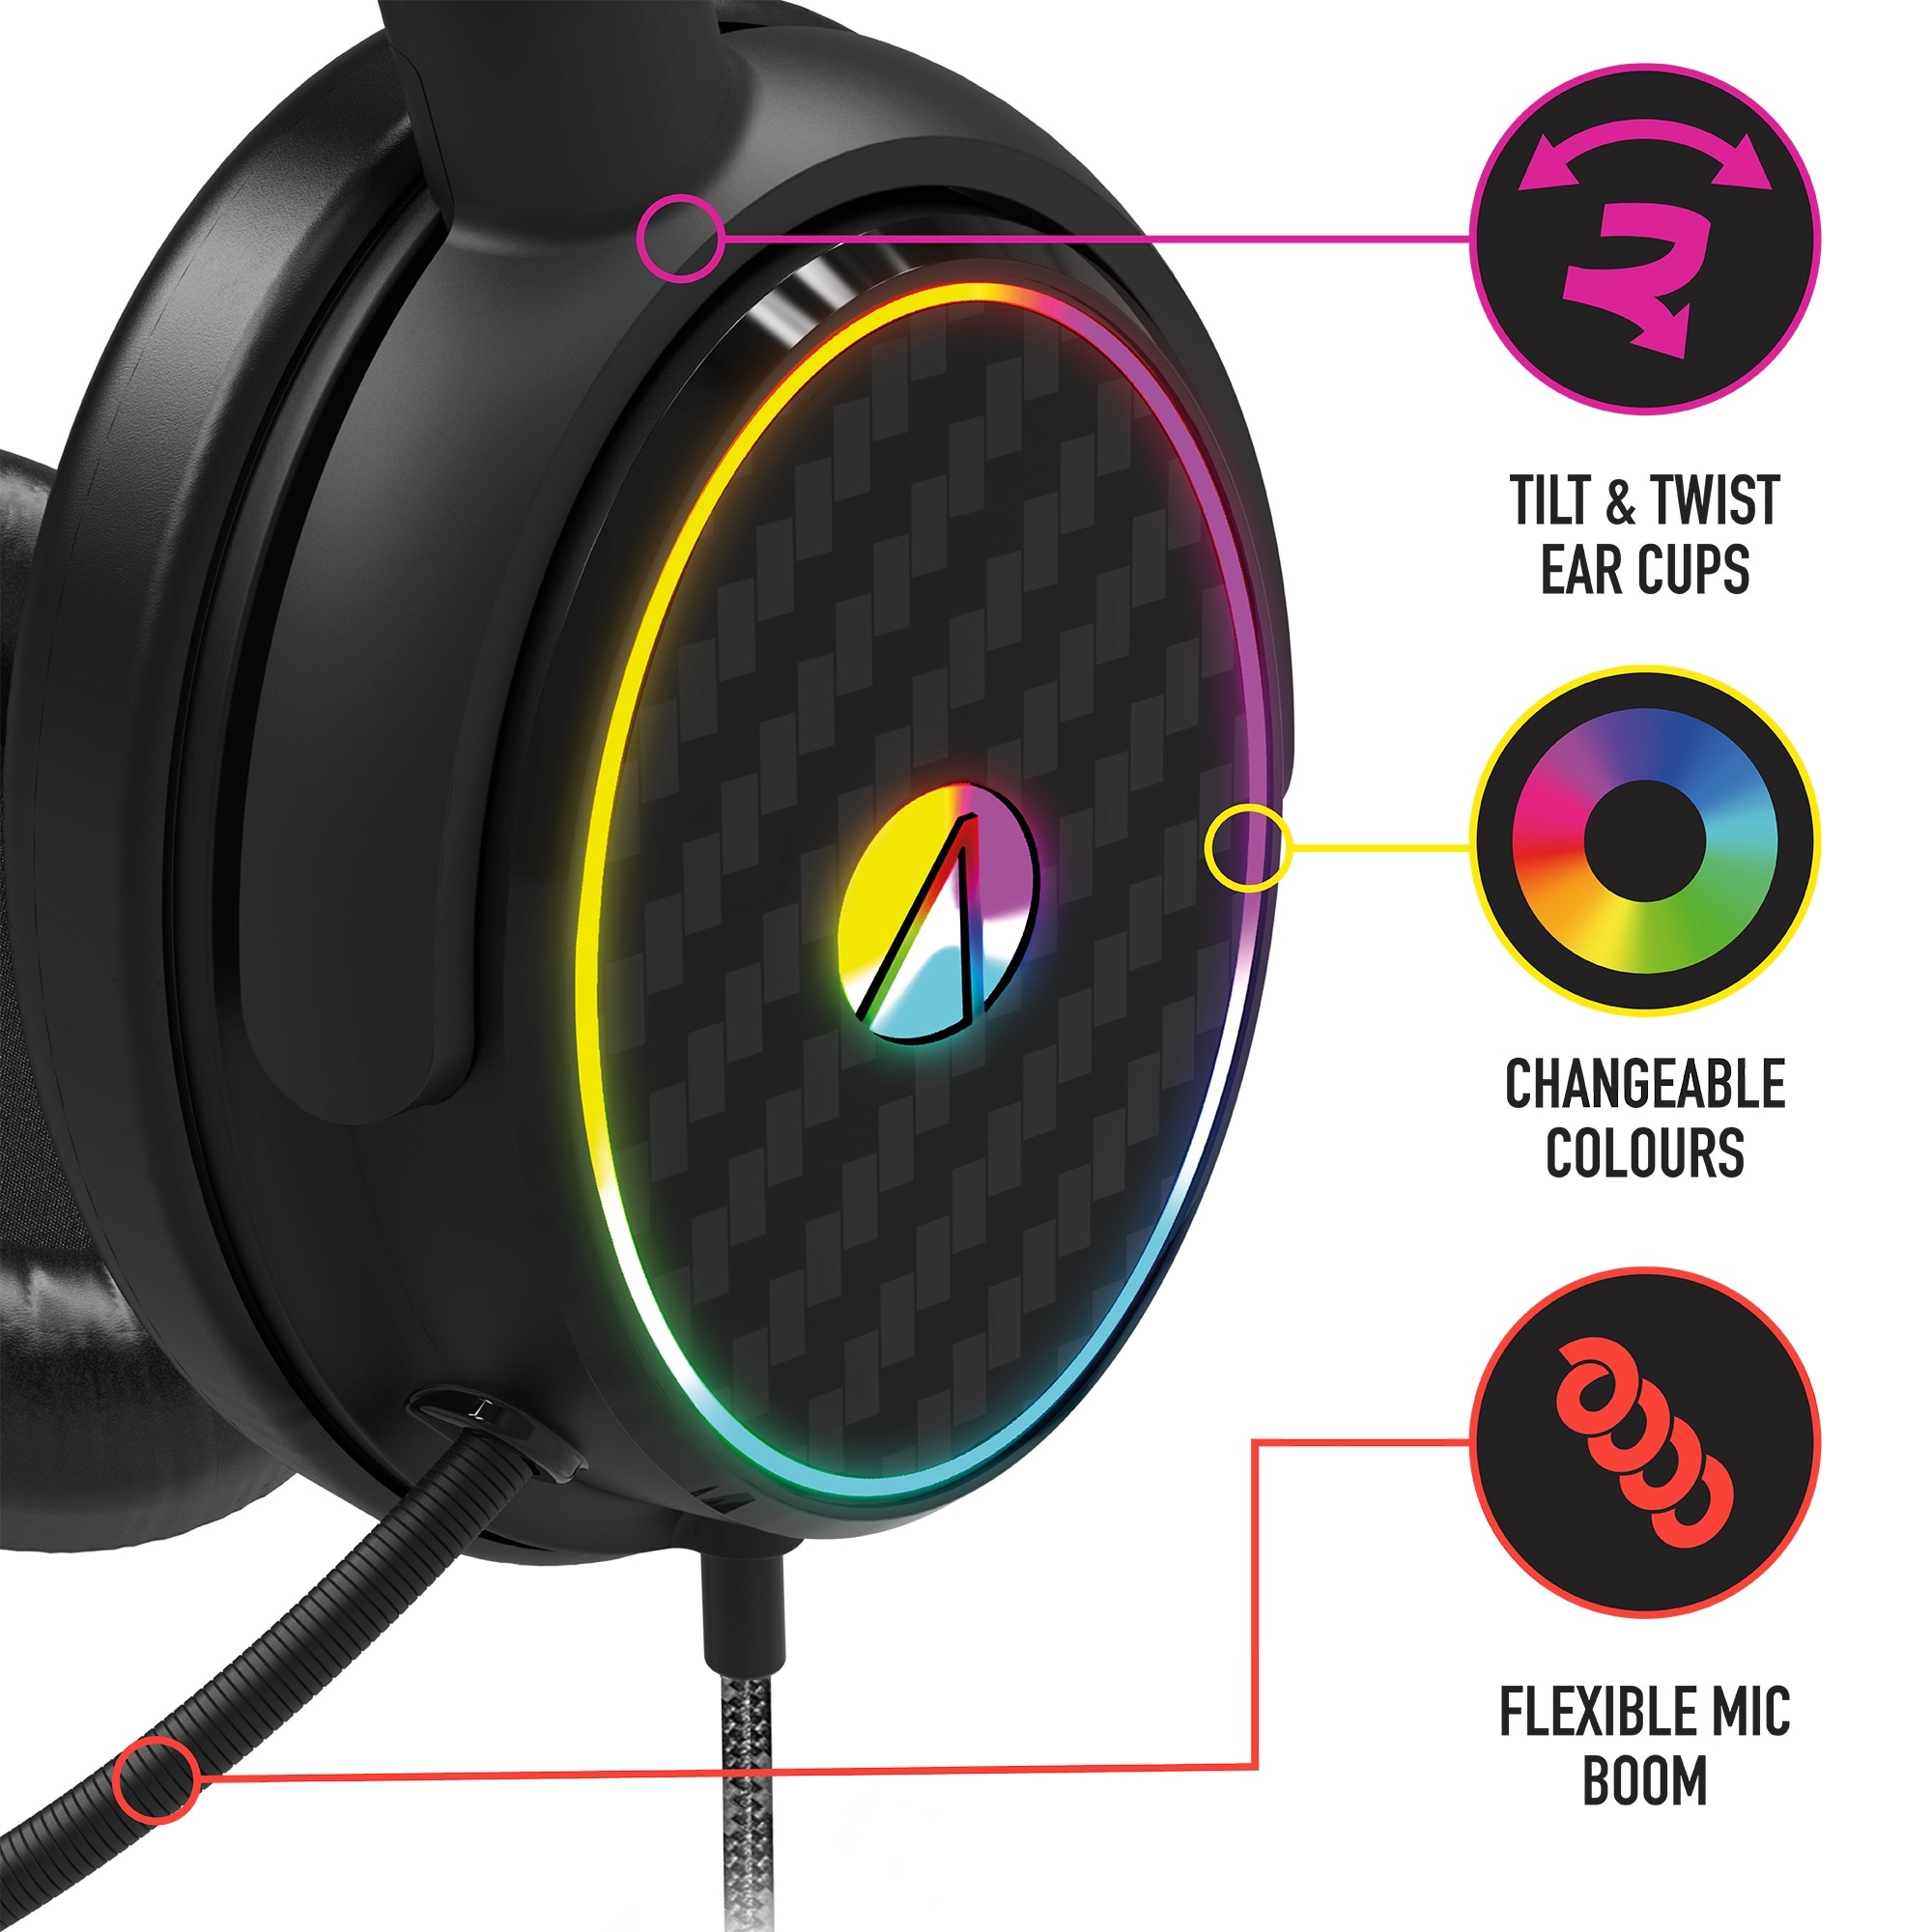 kaufen Beleuchtung«, C6-100 Gaming Gaming-Headset UNIVERSAL | Plastikfreie Headset »Stereo online LED mit Stealth Verpackung